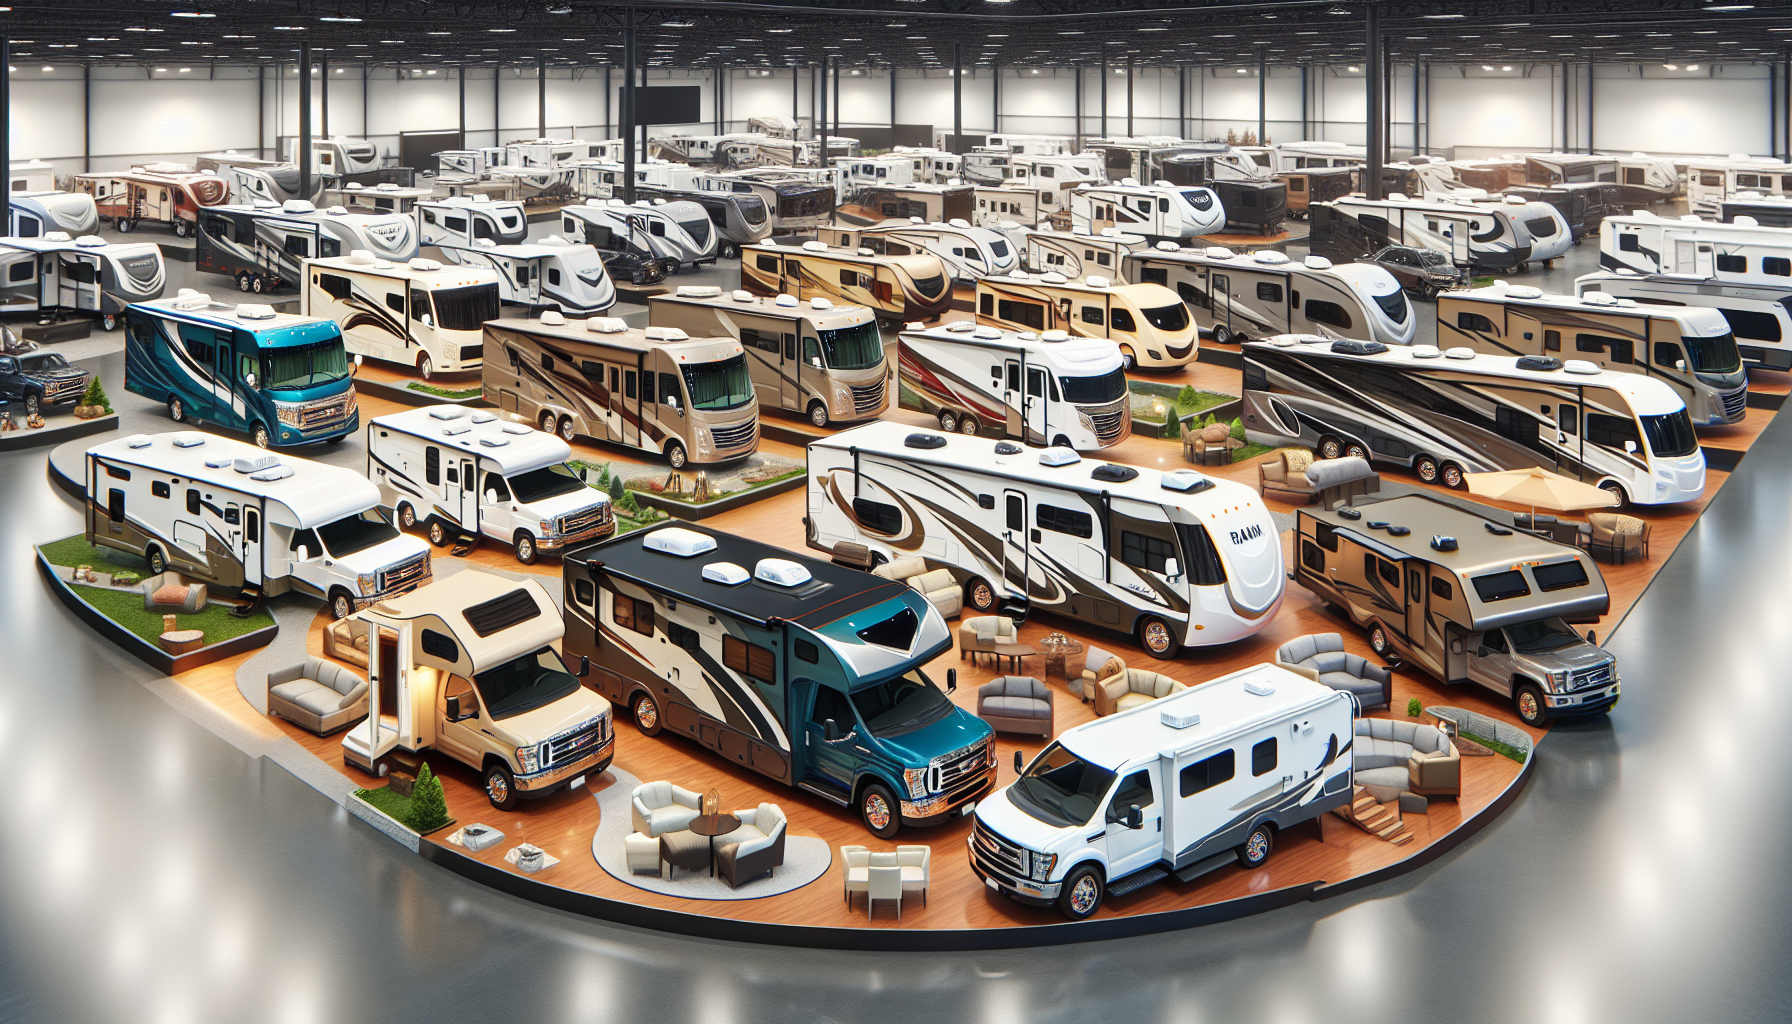 What You Need To Know Before Buying An RV?